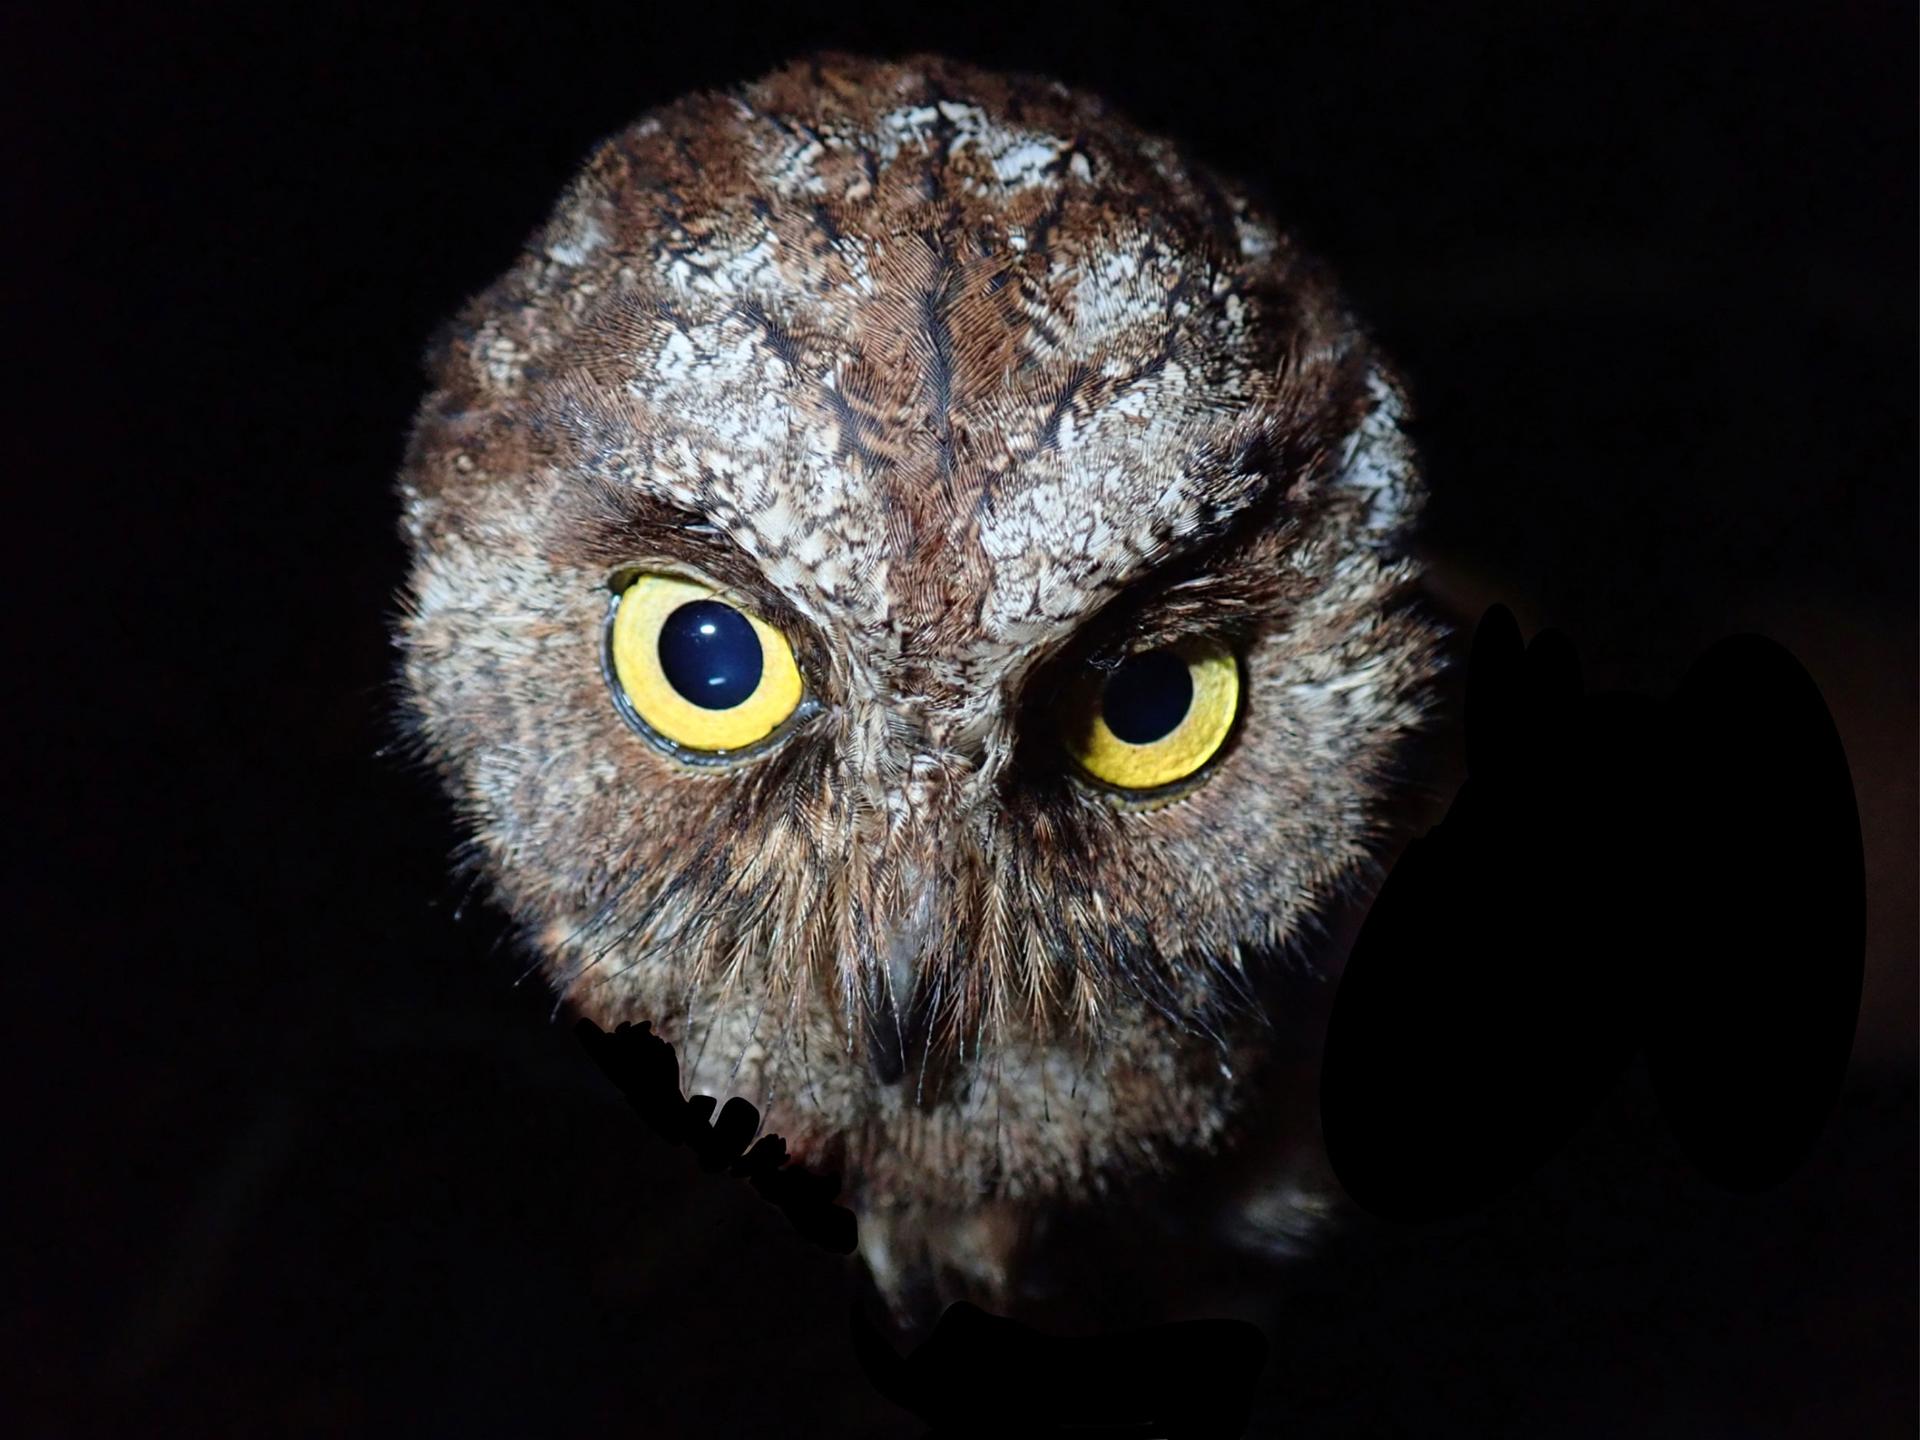 The Príncipe scops-owl is active at night. Its brown plumage helps it hide from predators while it sleeps in the trees during the day.